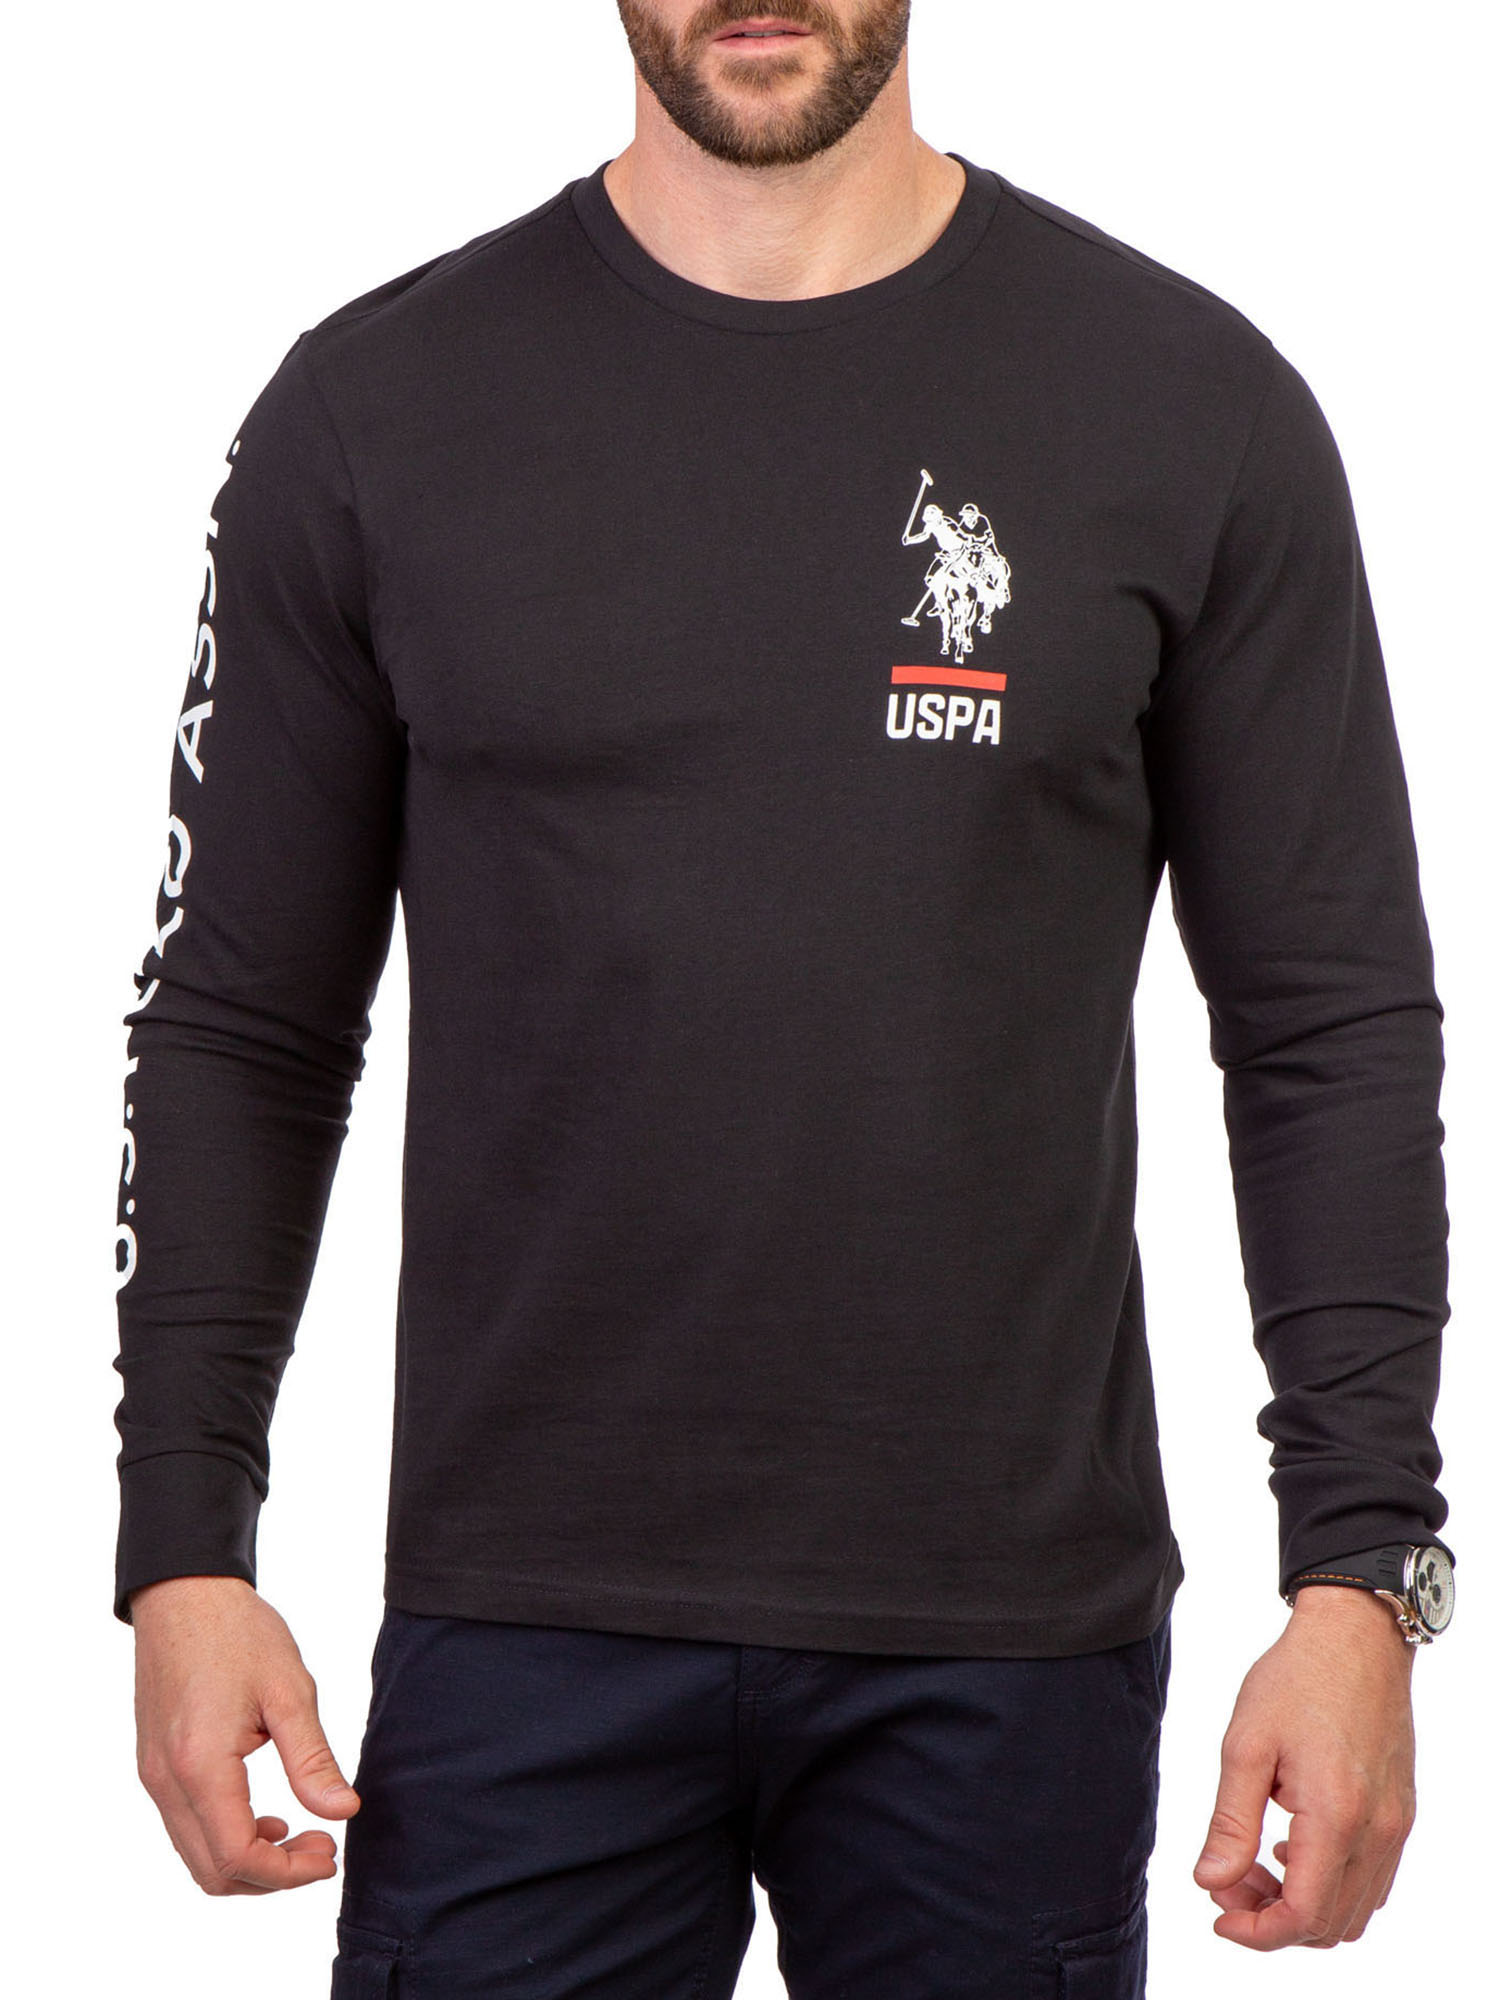 U.S. Polo Assn. Men's and Big Men's Long Sleeve Graphic T-Shirt - image 1 of 2